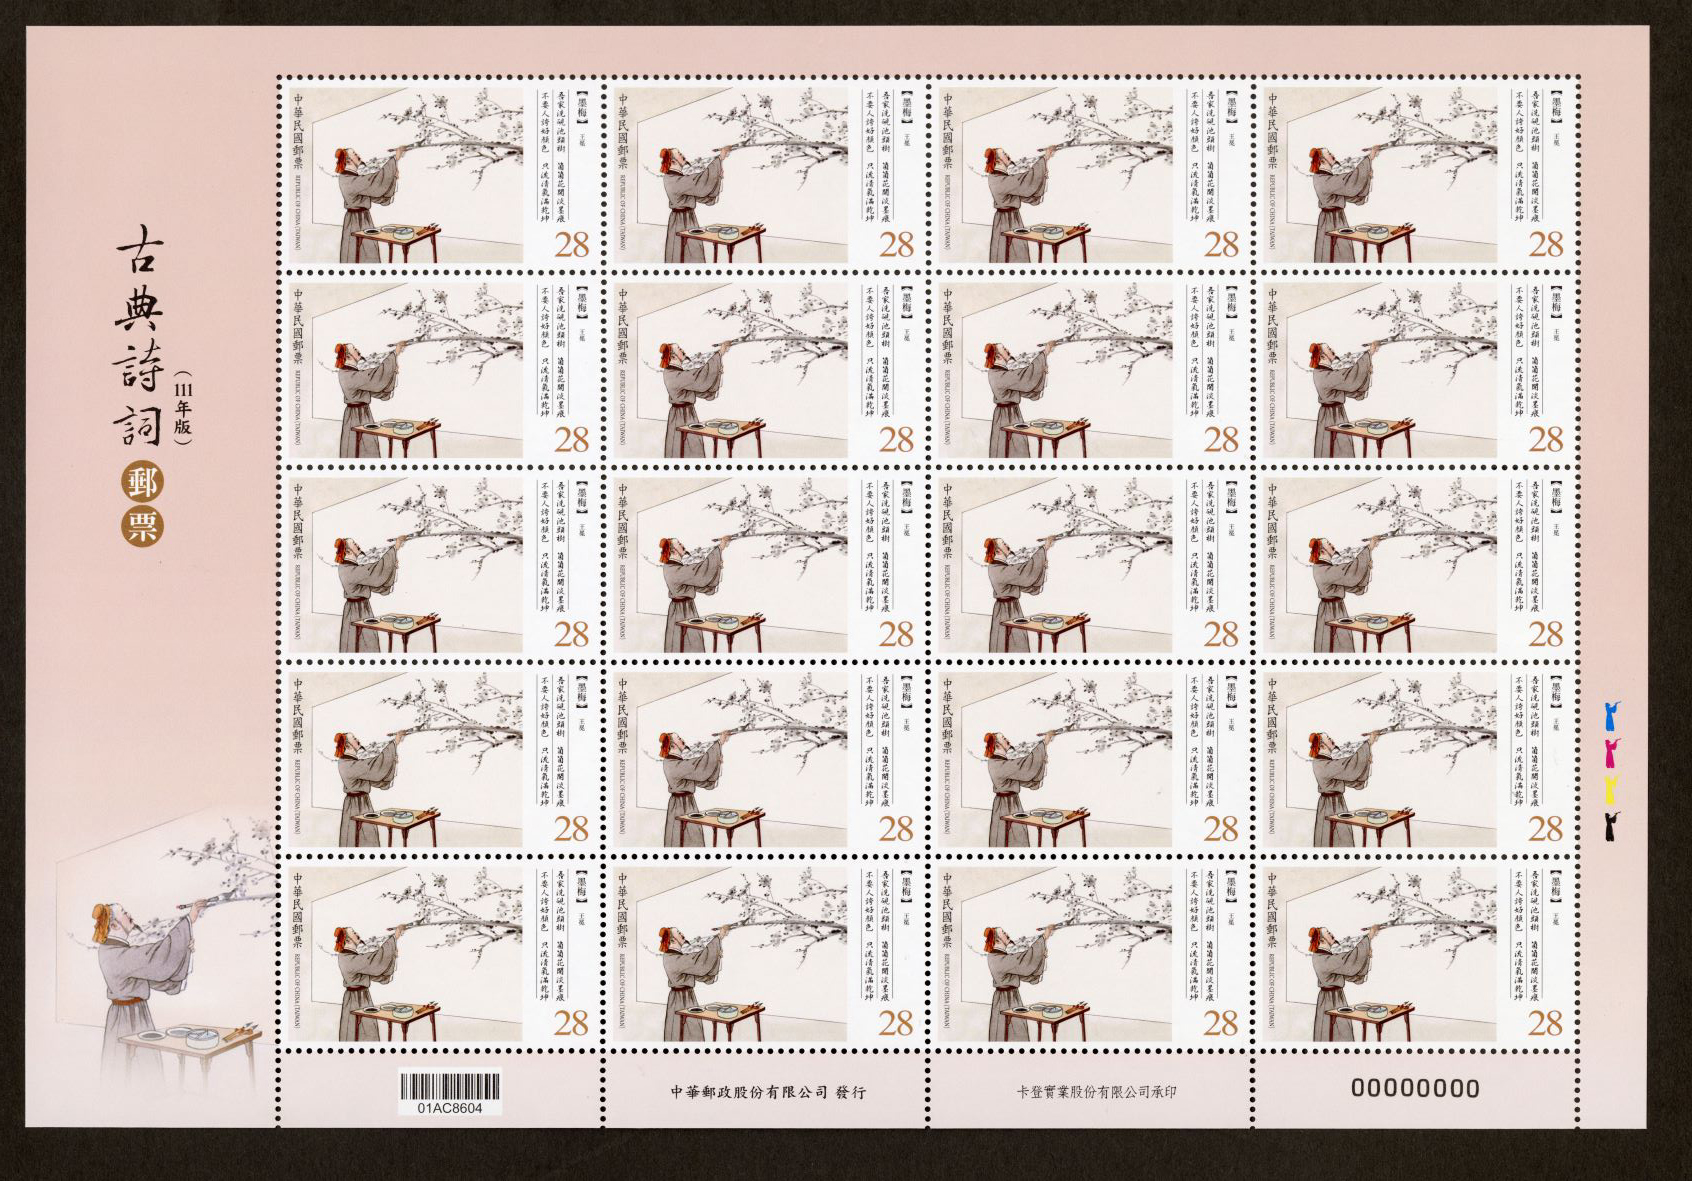 (Sp.724.40)Sp.724 Classical Chinese Poetry Postage Stamps (Issue of 2022)